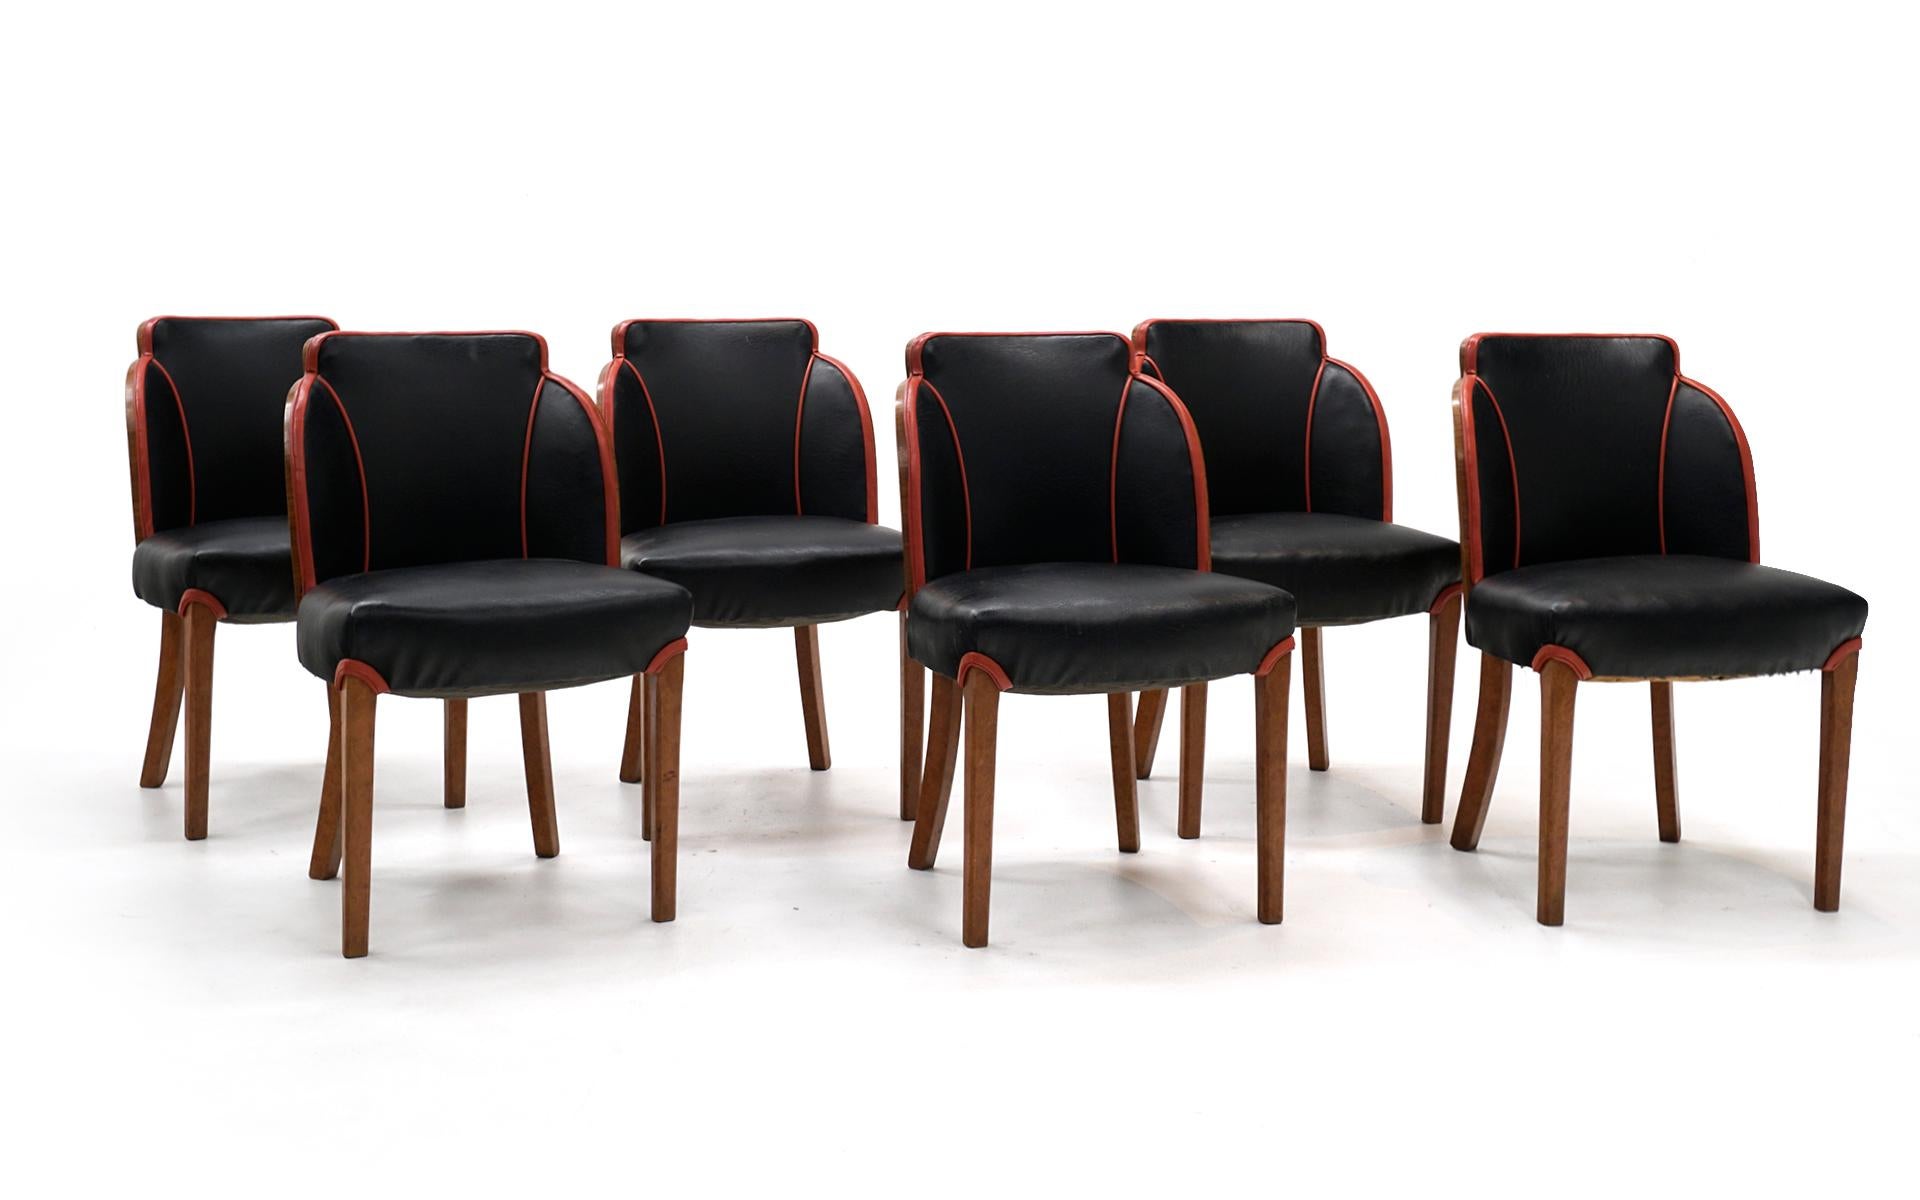 Set of 6 Art Deco Cloud dining chairs designed by Harry and Lou Epstein, 1930s. Curved walnut burl seat backs with black leather and red piping. All are in very good condition with minimal signs of wear. Upholstery is newer.